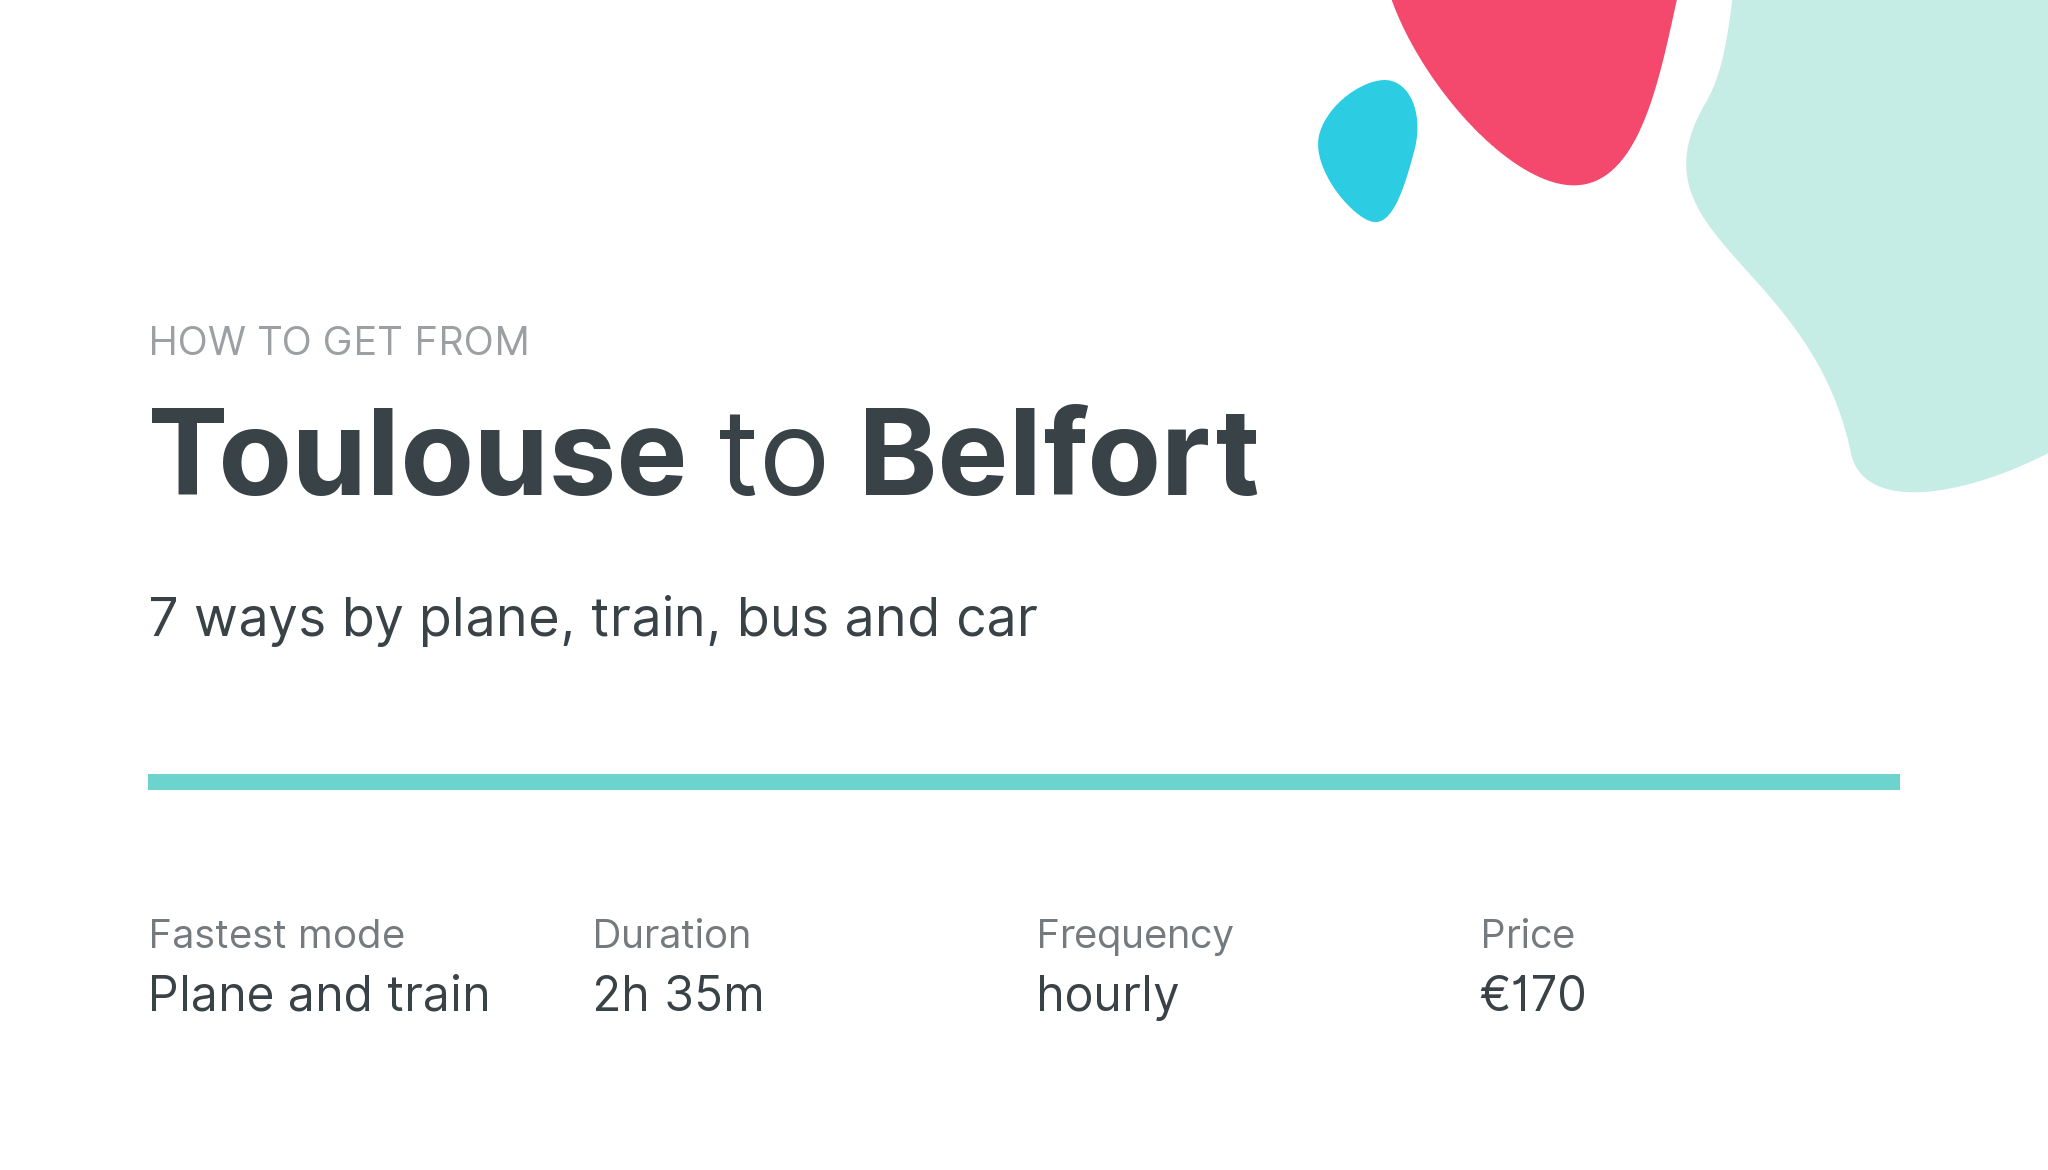 How do I get from Toulouse to Belfort